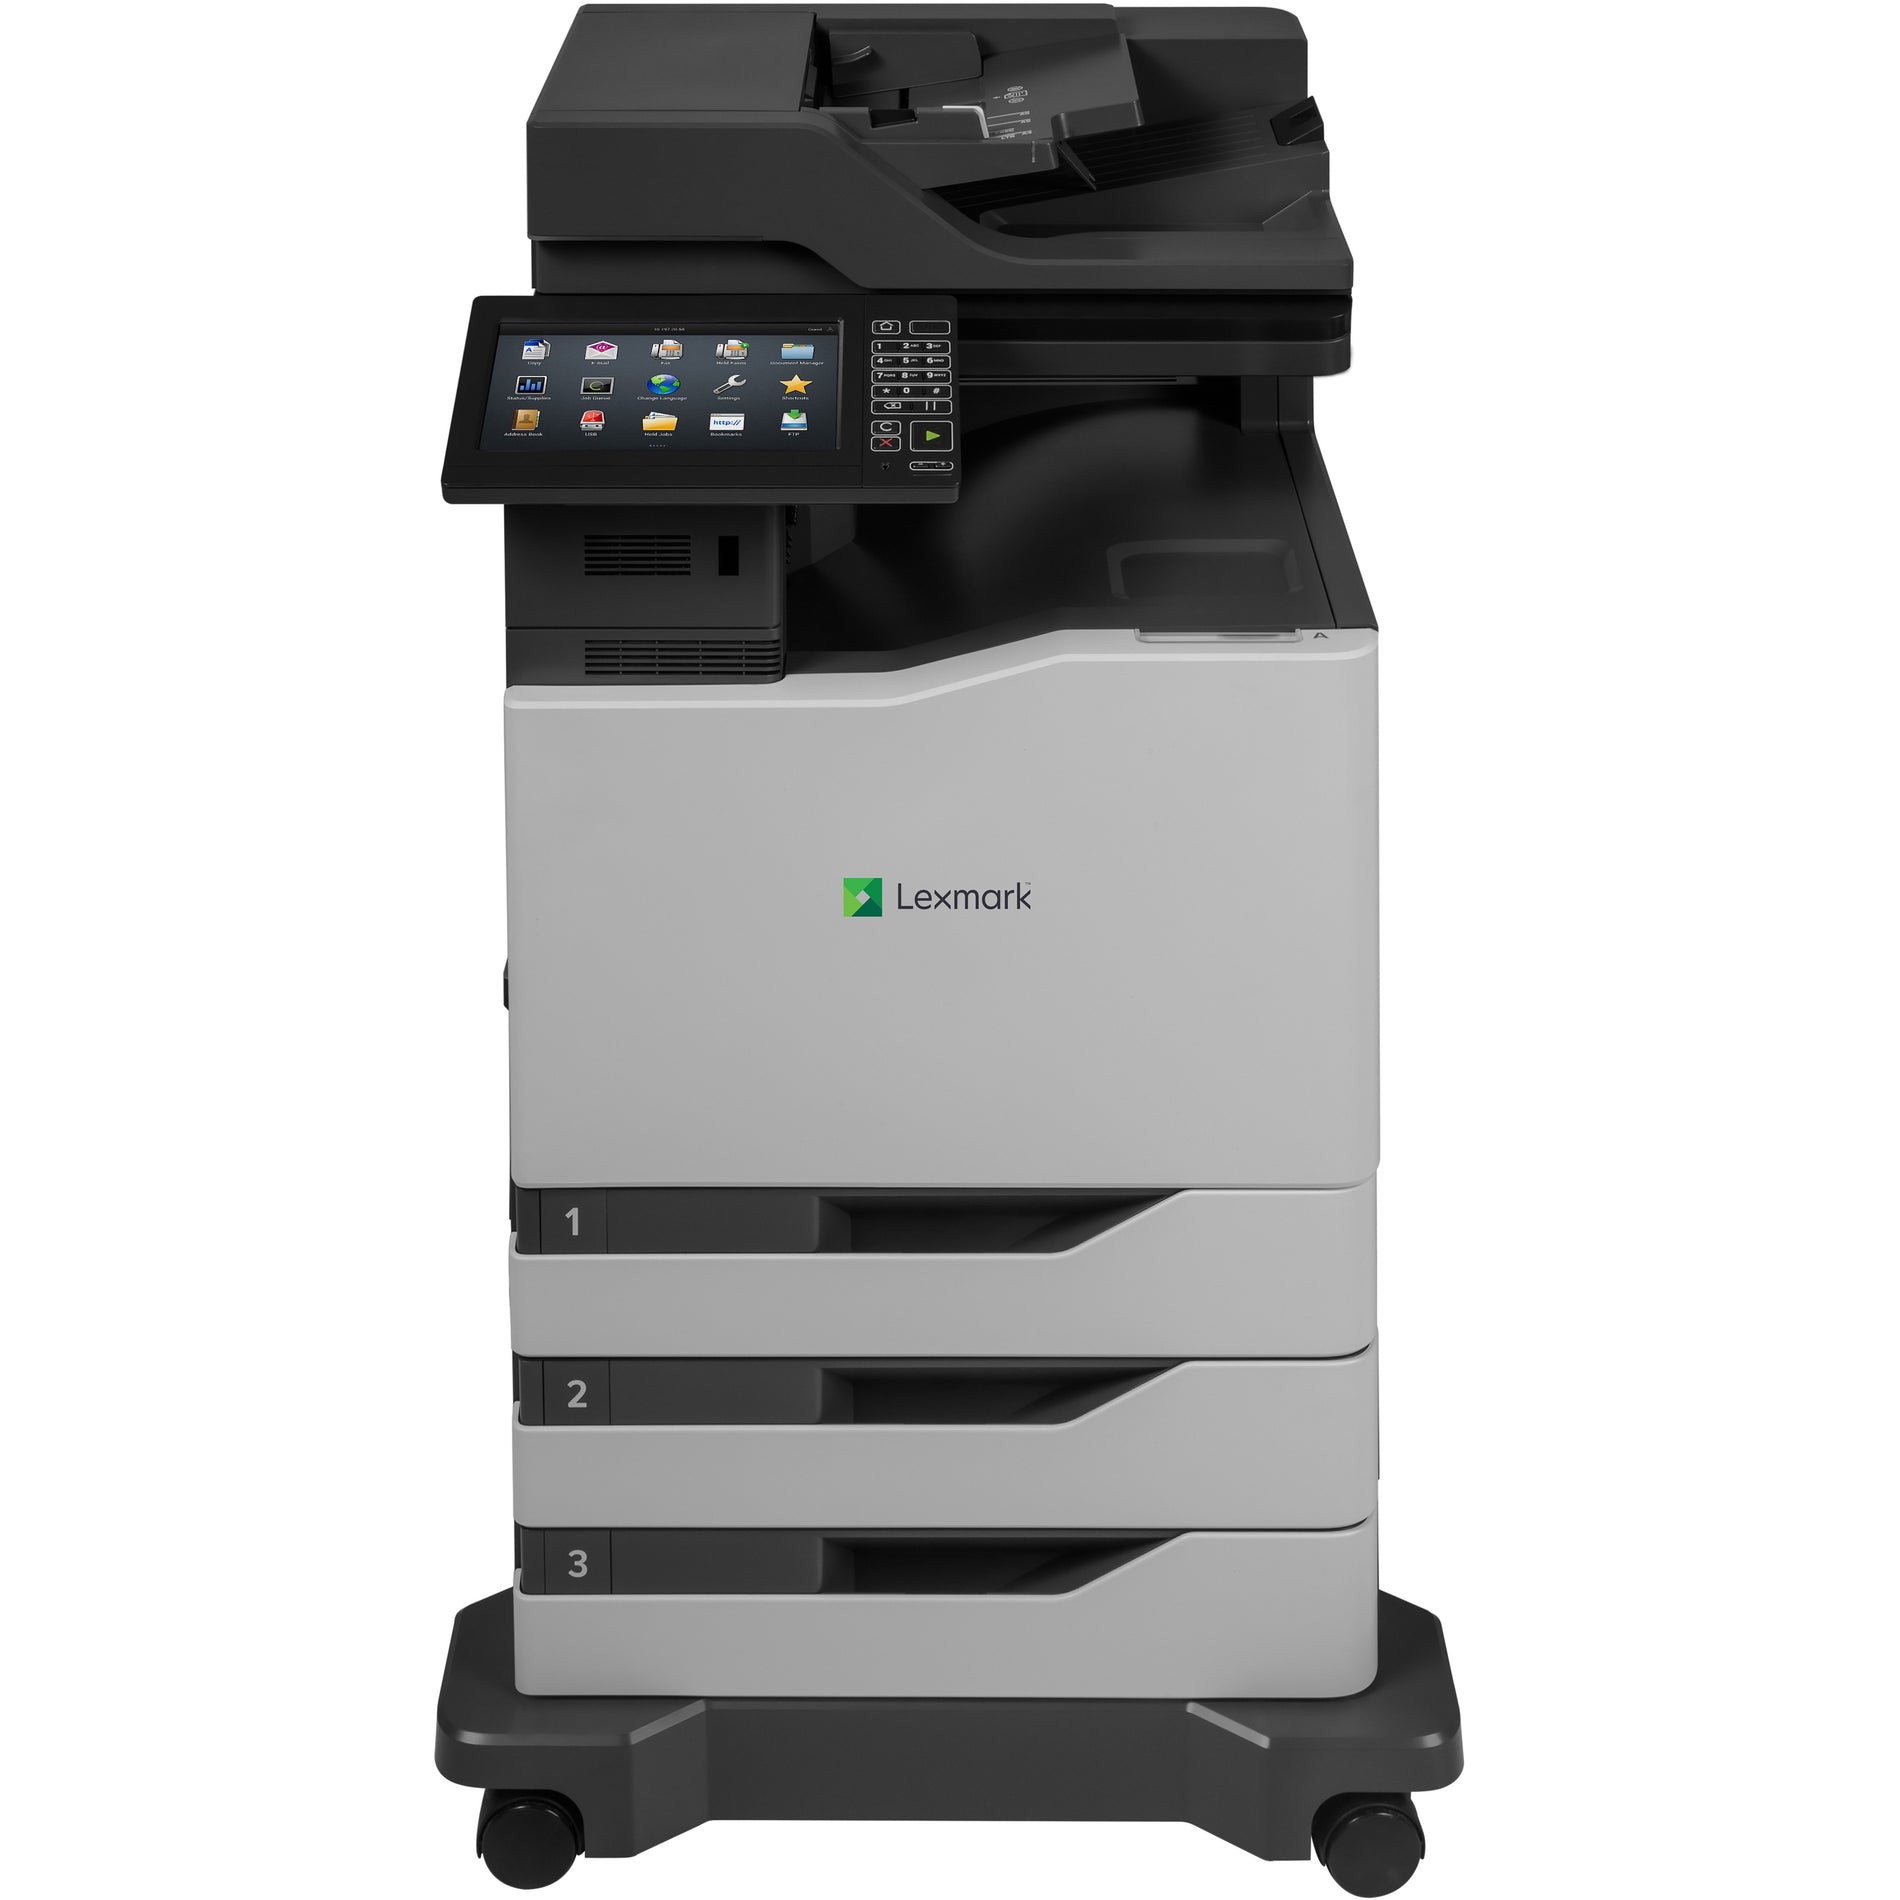 Lexmark 42KT251 CX825dte Laser Multifunction Printer, Color, Flatbed, 1 Year Warranty, 250,000 Duty Cycle, TAA Compliant, Energy Star, USB, AC Supply, 230V AC, 10" Touchscreen